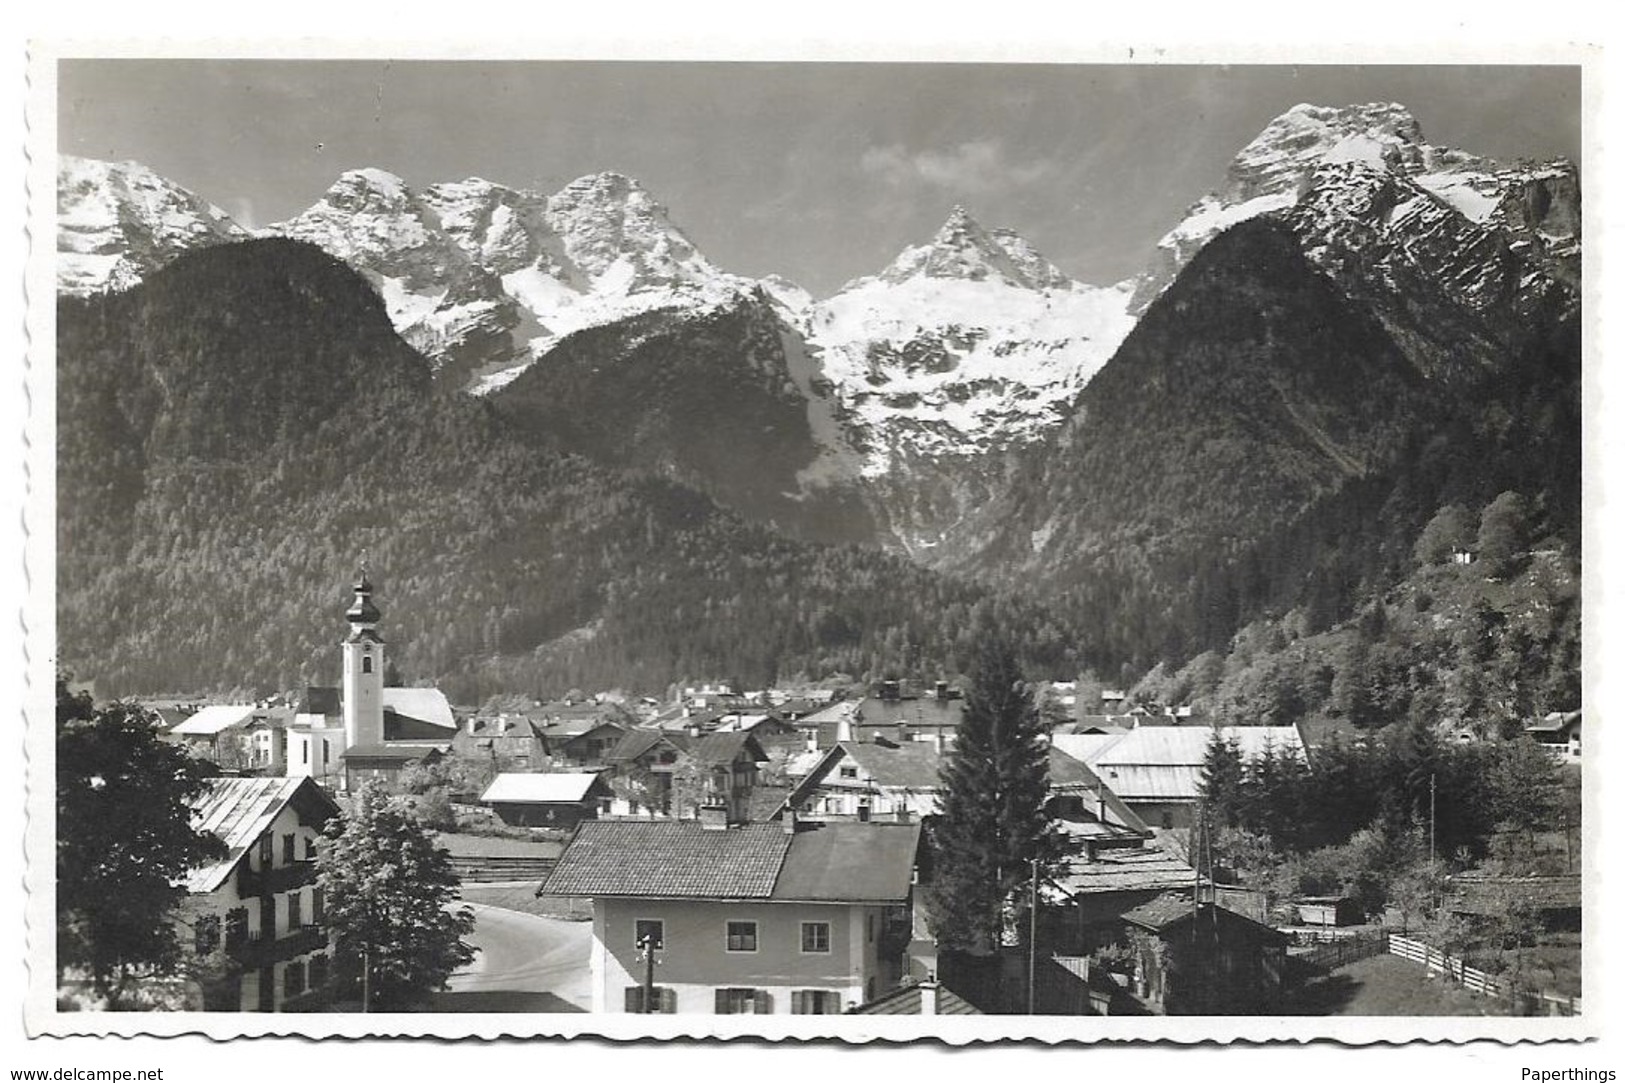 EARLY REAL PHOTOGRAPH POSTCARD, STONE MOUNTAINS, LOFER, AUSTRIA, HOUSES, BUILDINGS, SCENIC - Lofer